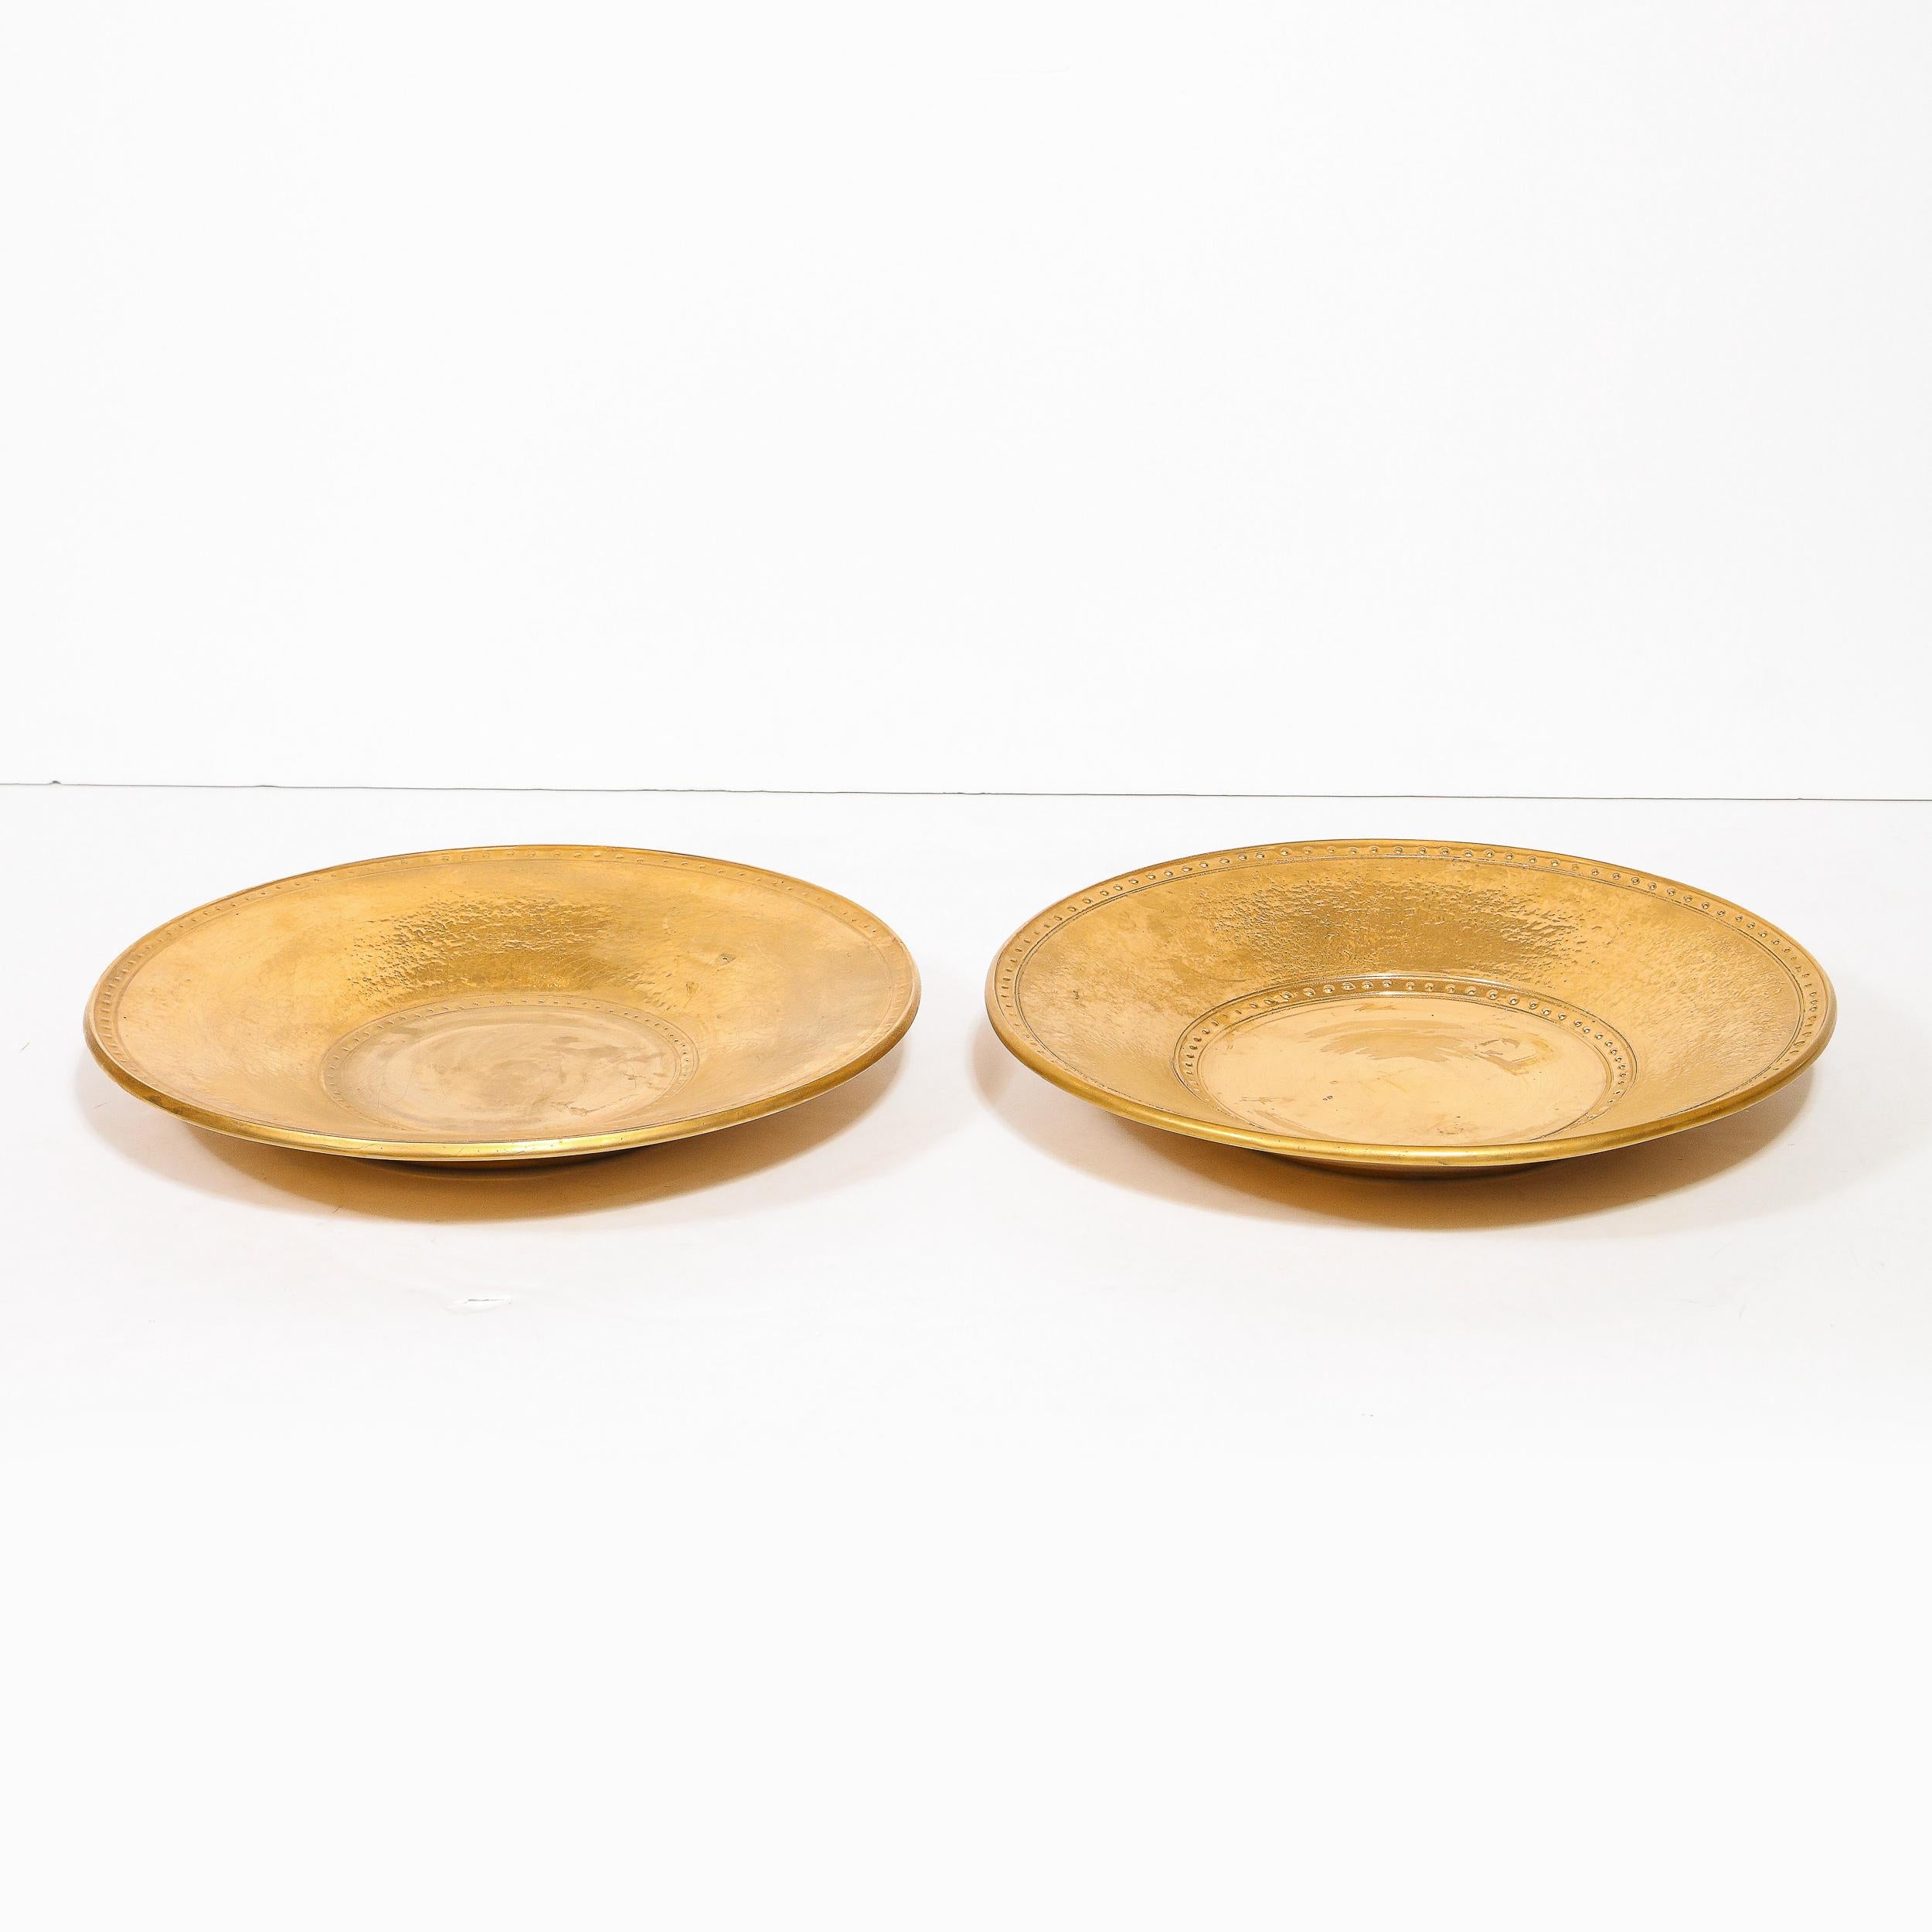 Pair of Modernist 24kt Gold Leaf Center Plates Signed Rondier by Lorin Marsh 9